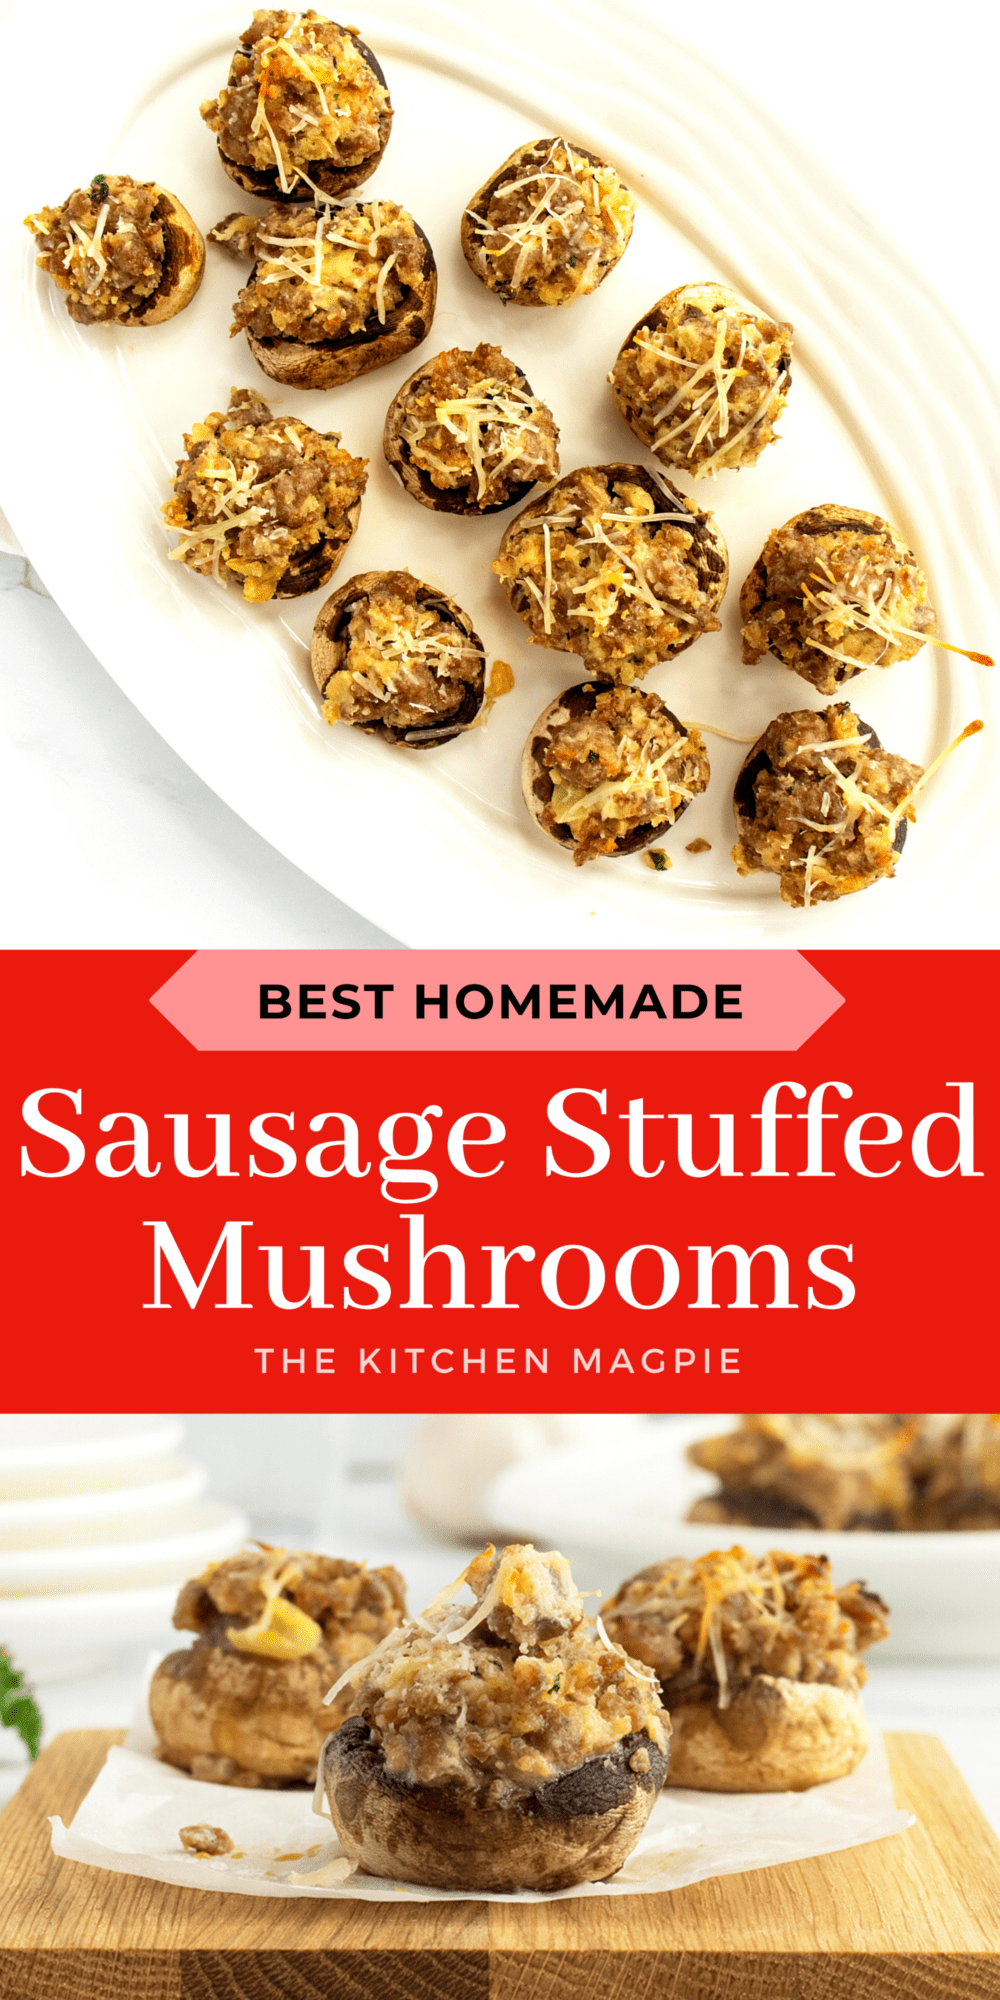 Ideal as a party snack or even just a handy little lunch, these sausage stuffed mushrooms provide an easy bite that is incredibly meaty and satisfying .